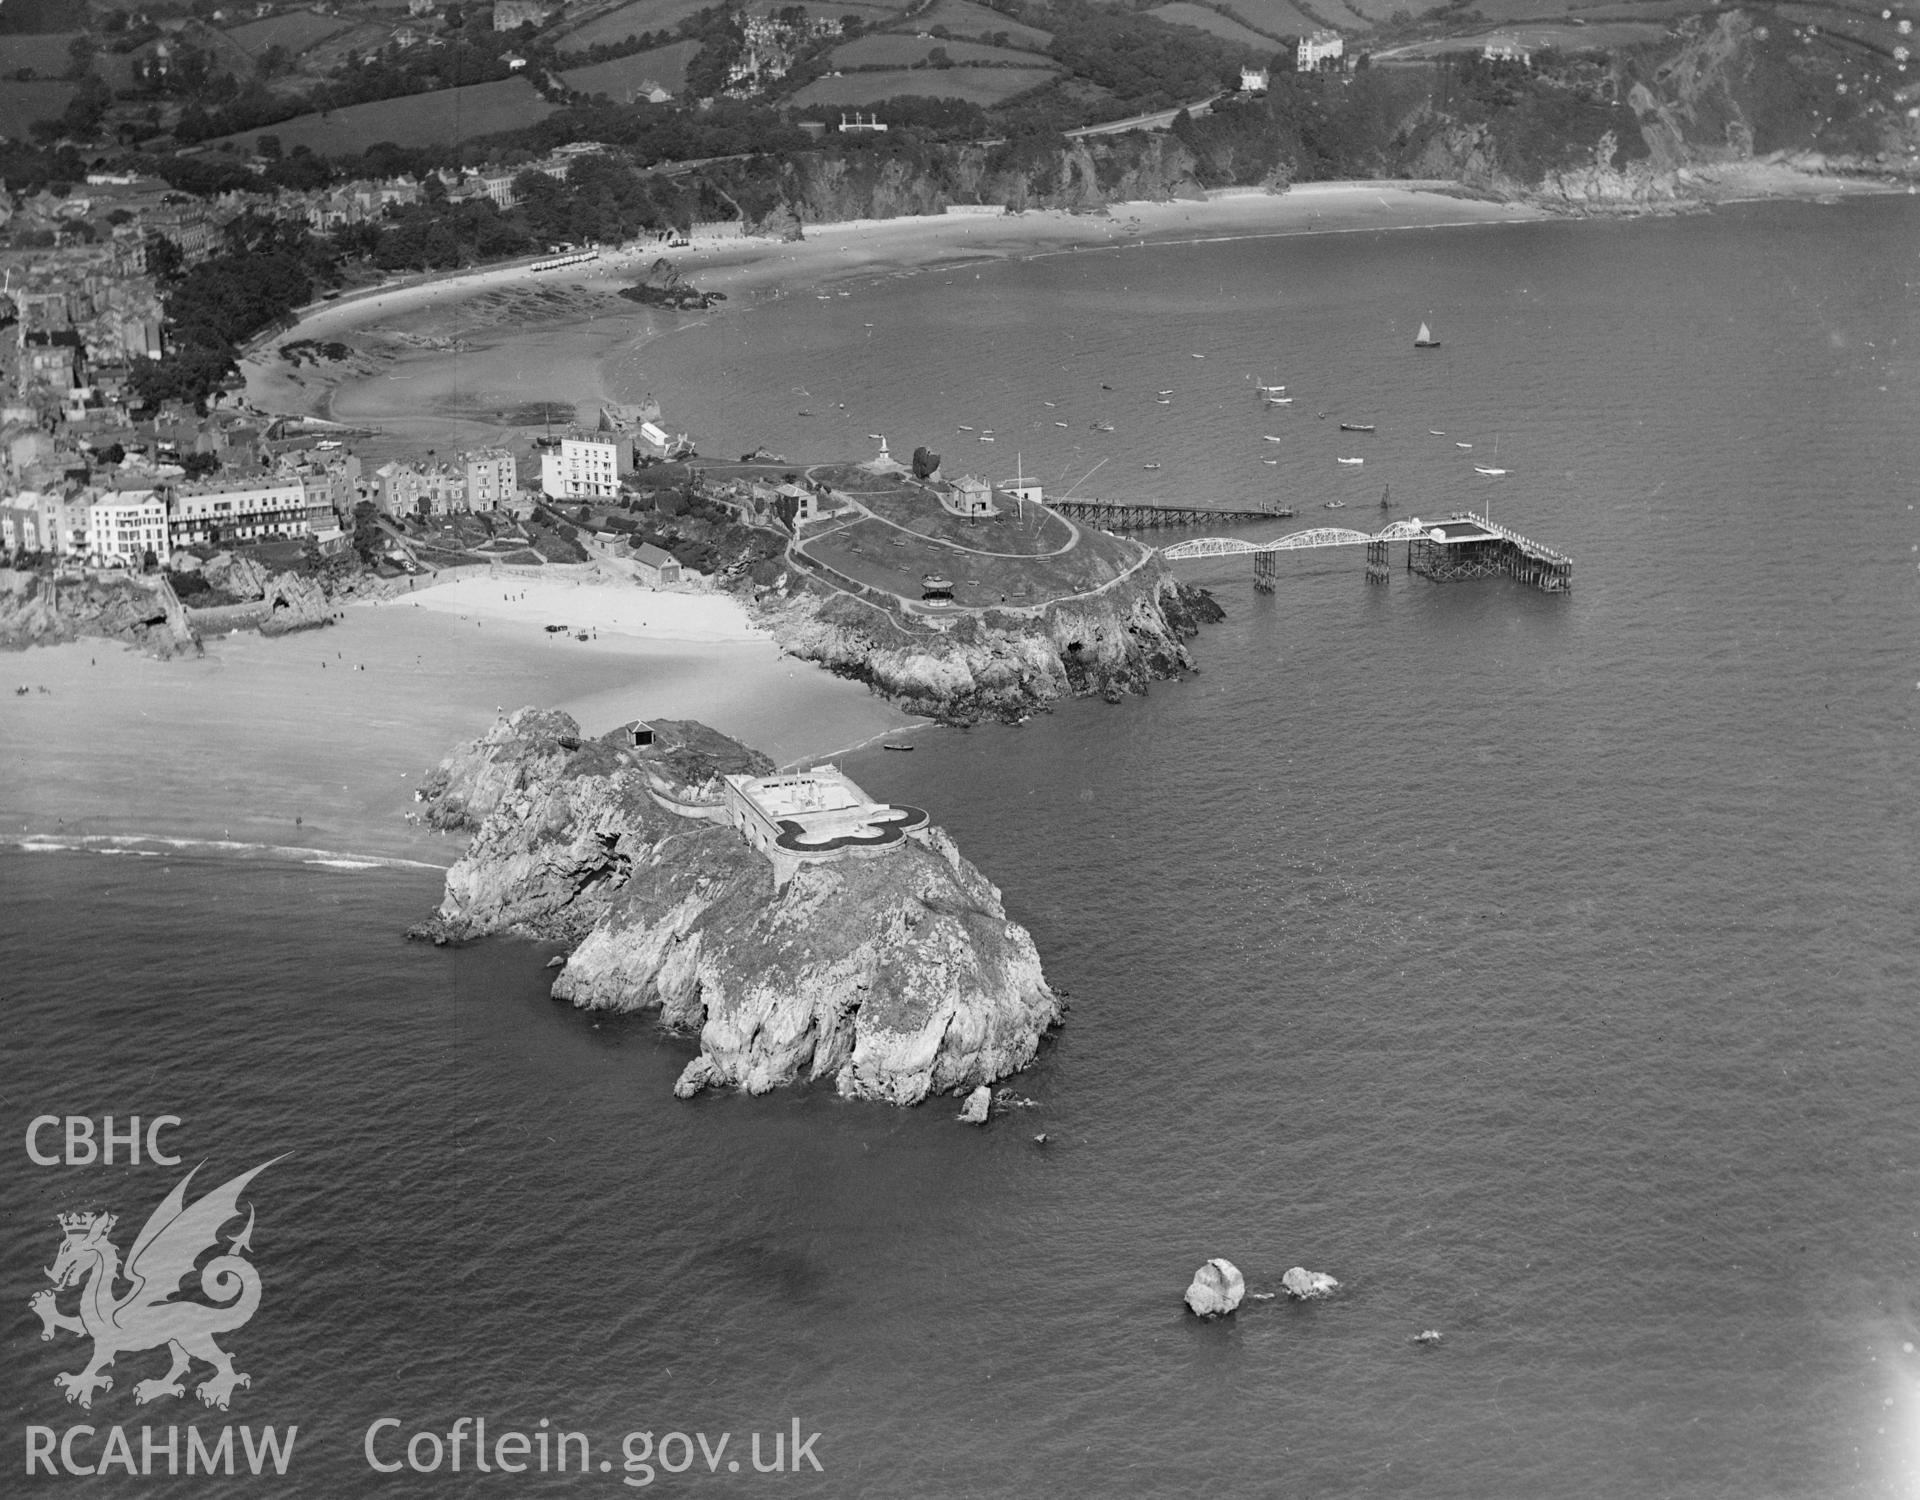 View of Tenby, oblique aerial view. 5?x4? black and white glass plate negative.